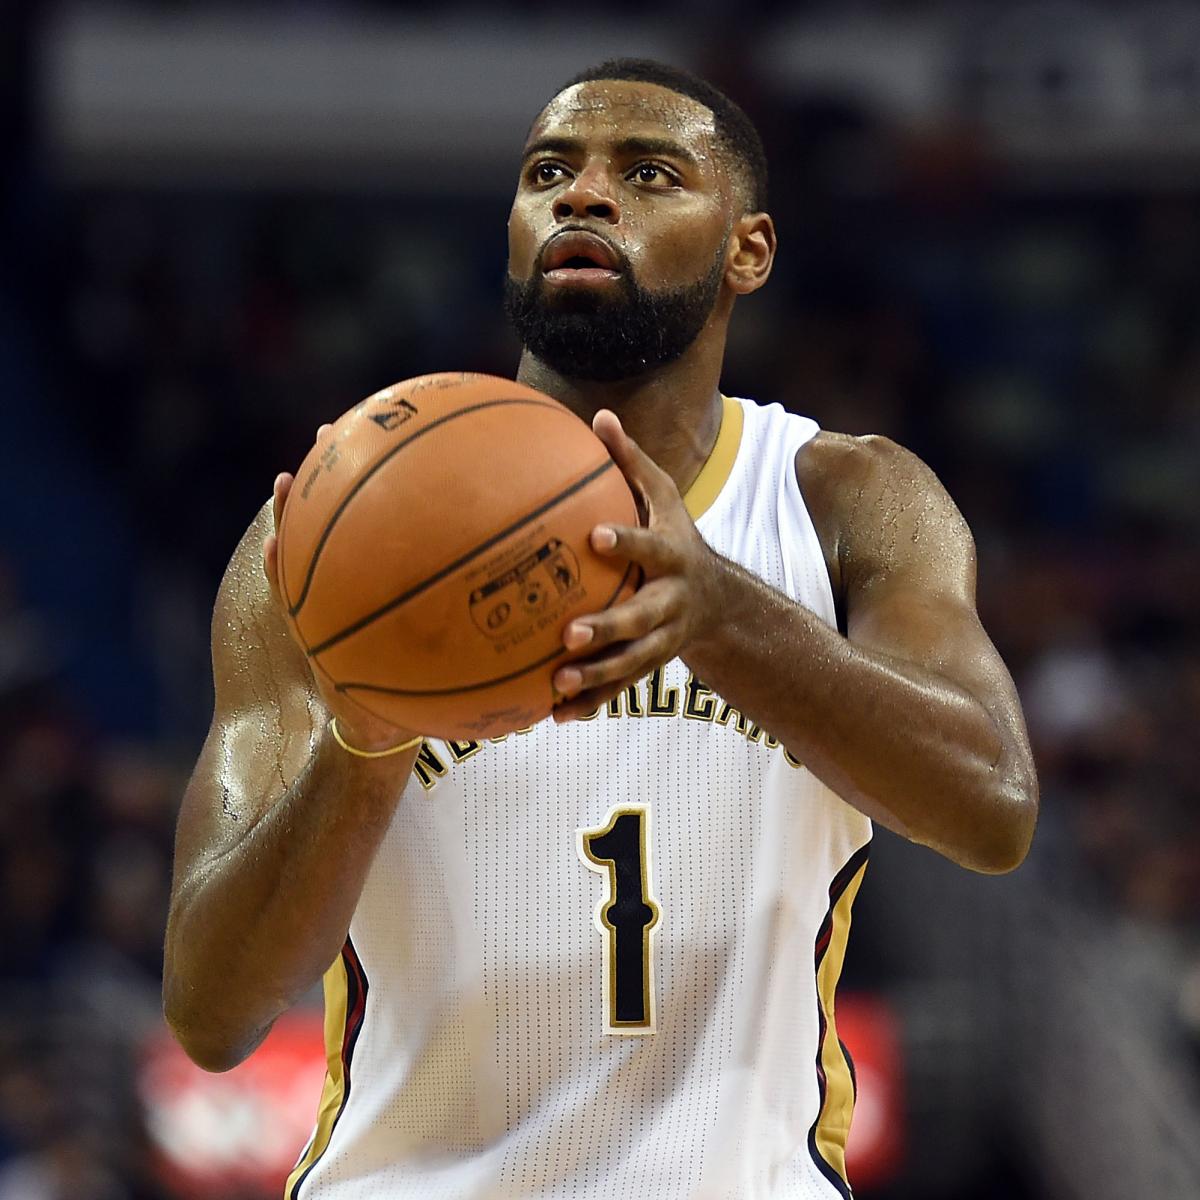 Bleacher Report on X: Tyreke Evans has been reinstated by the NBA